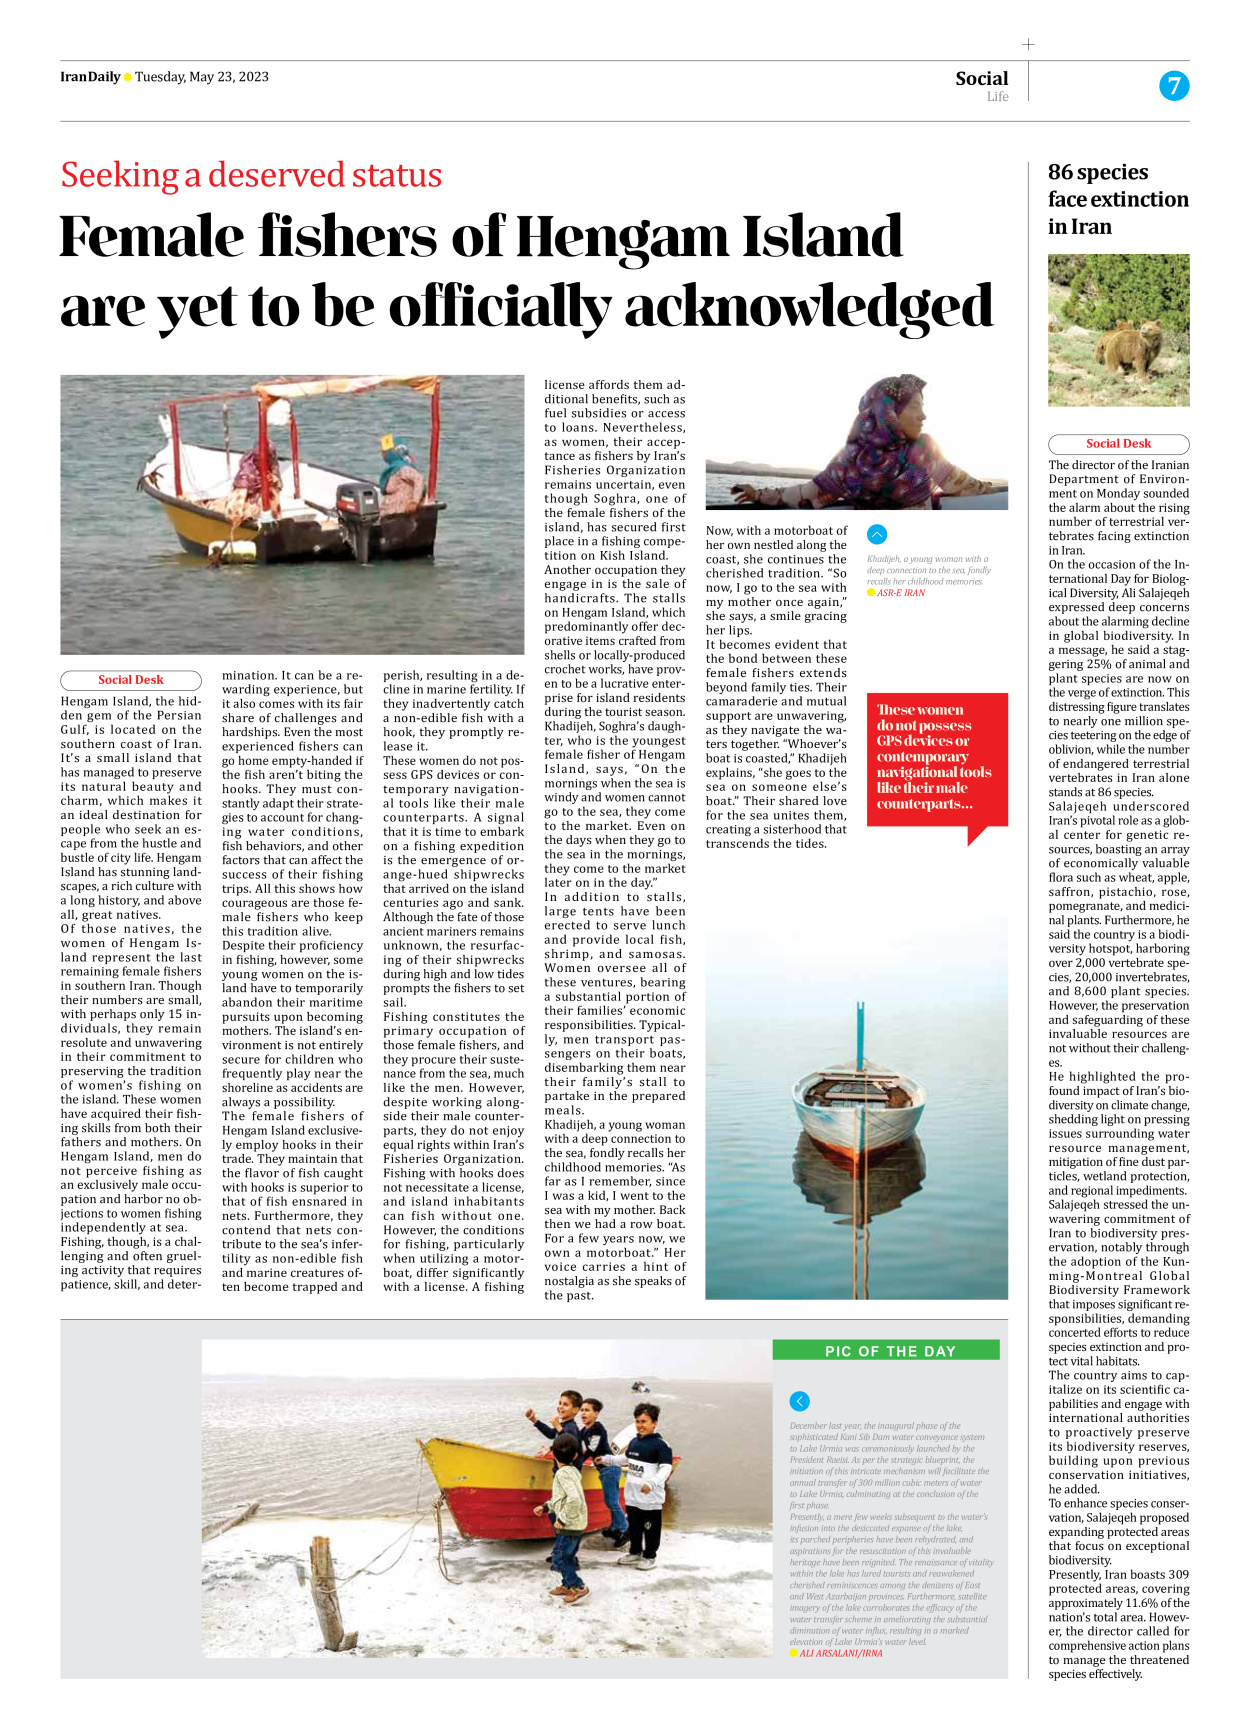 Iran Daily - Number Seven Thousand Two Hundred and Ninety Eight - 23 May 2023 - Page 7